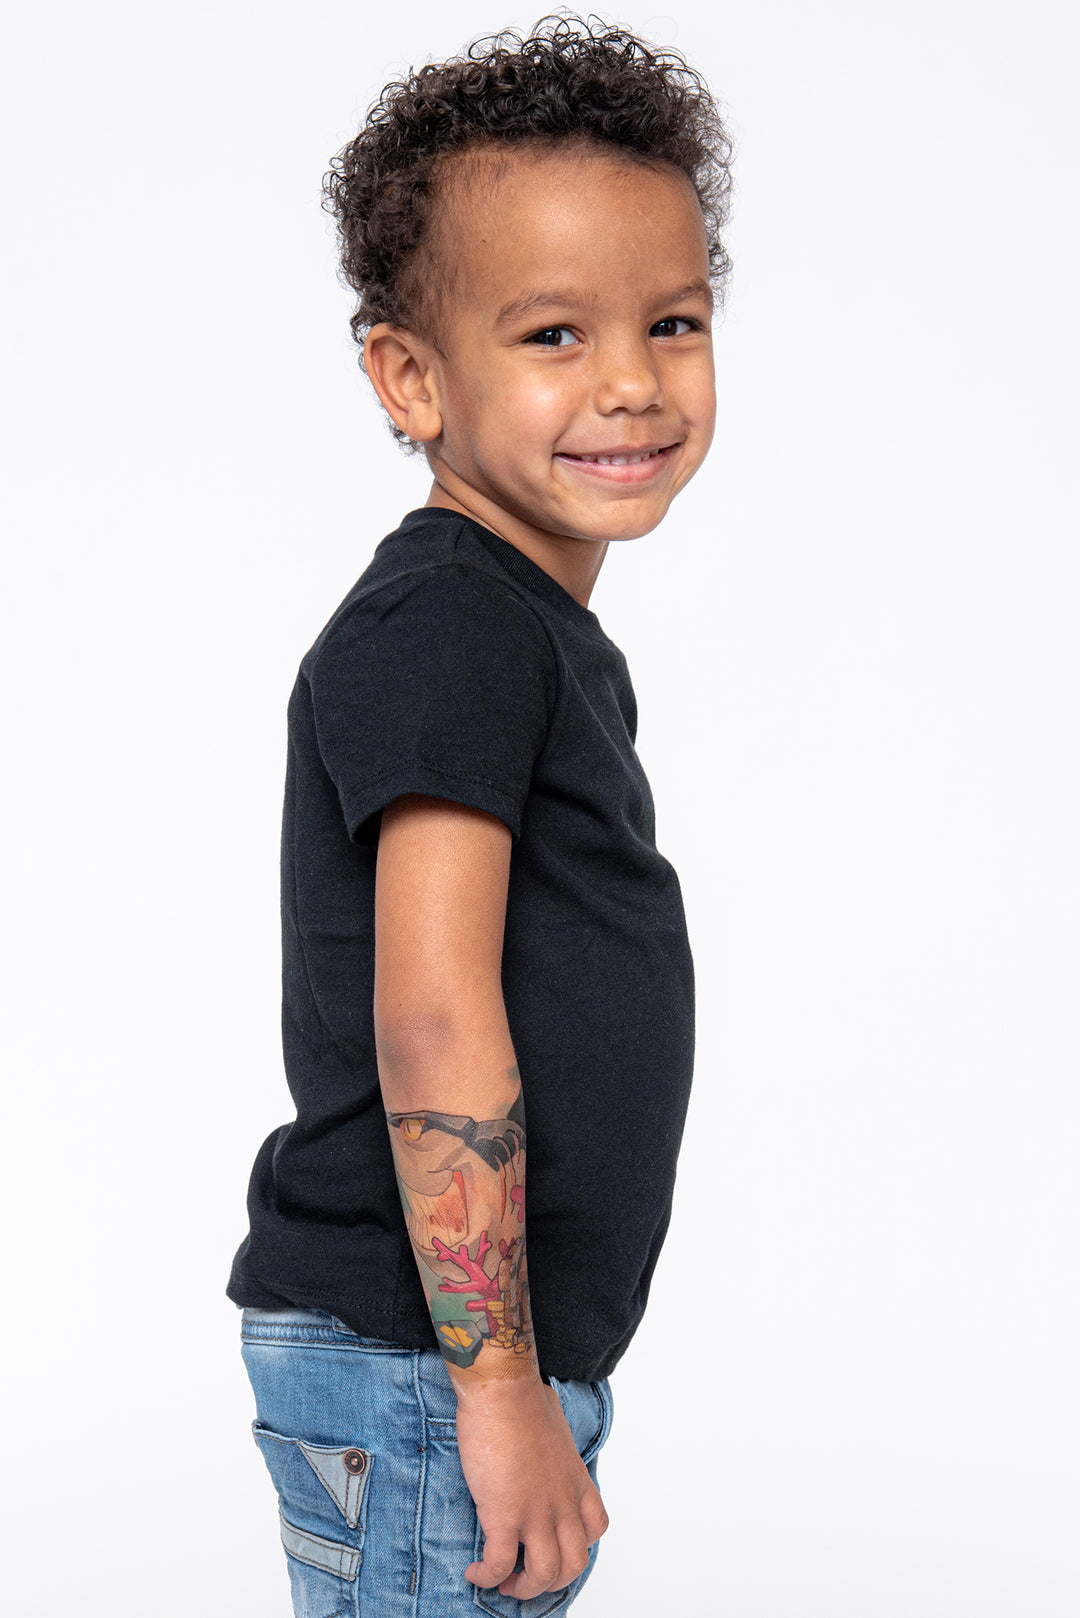 Young boy shows his shark tattoo on the forearm.